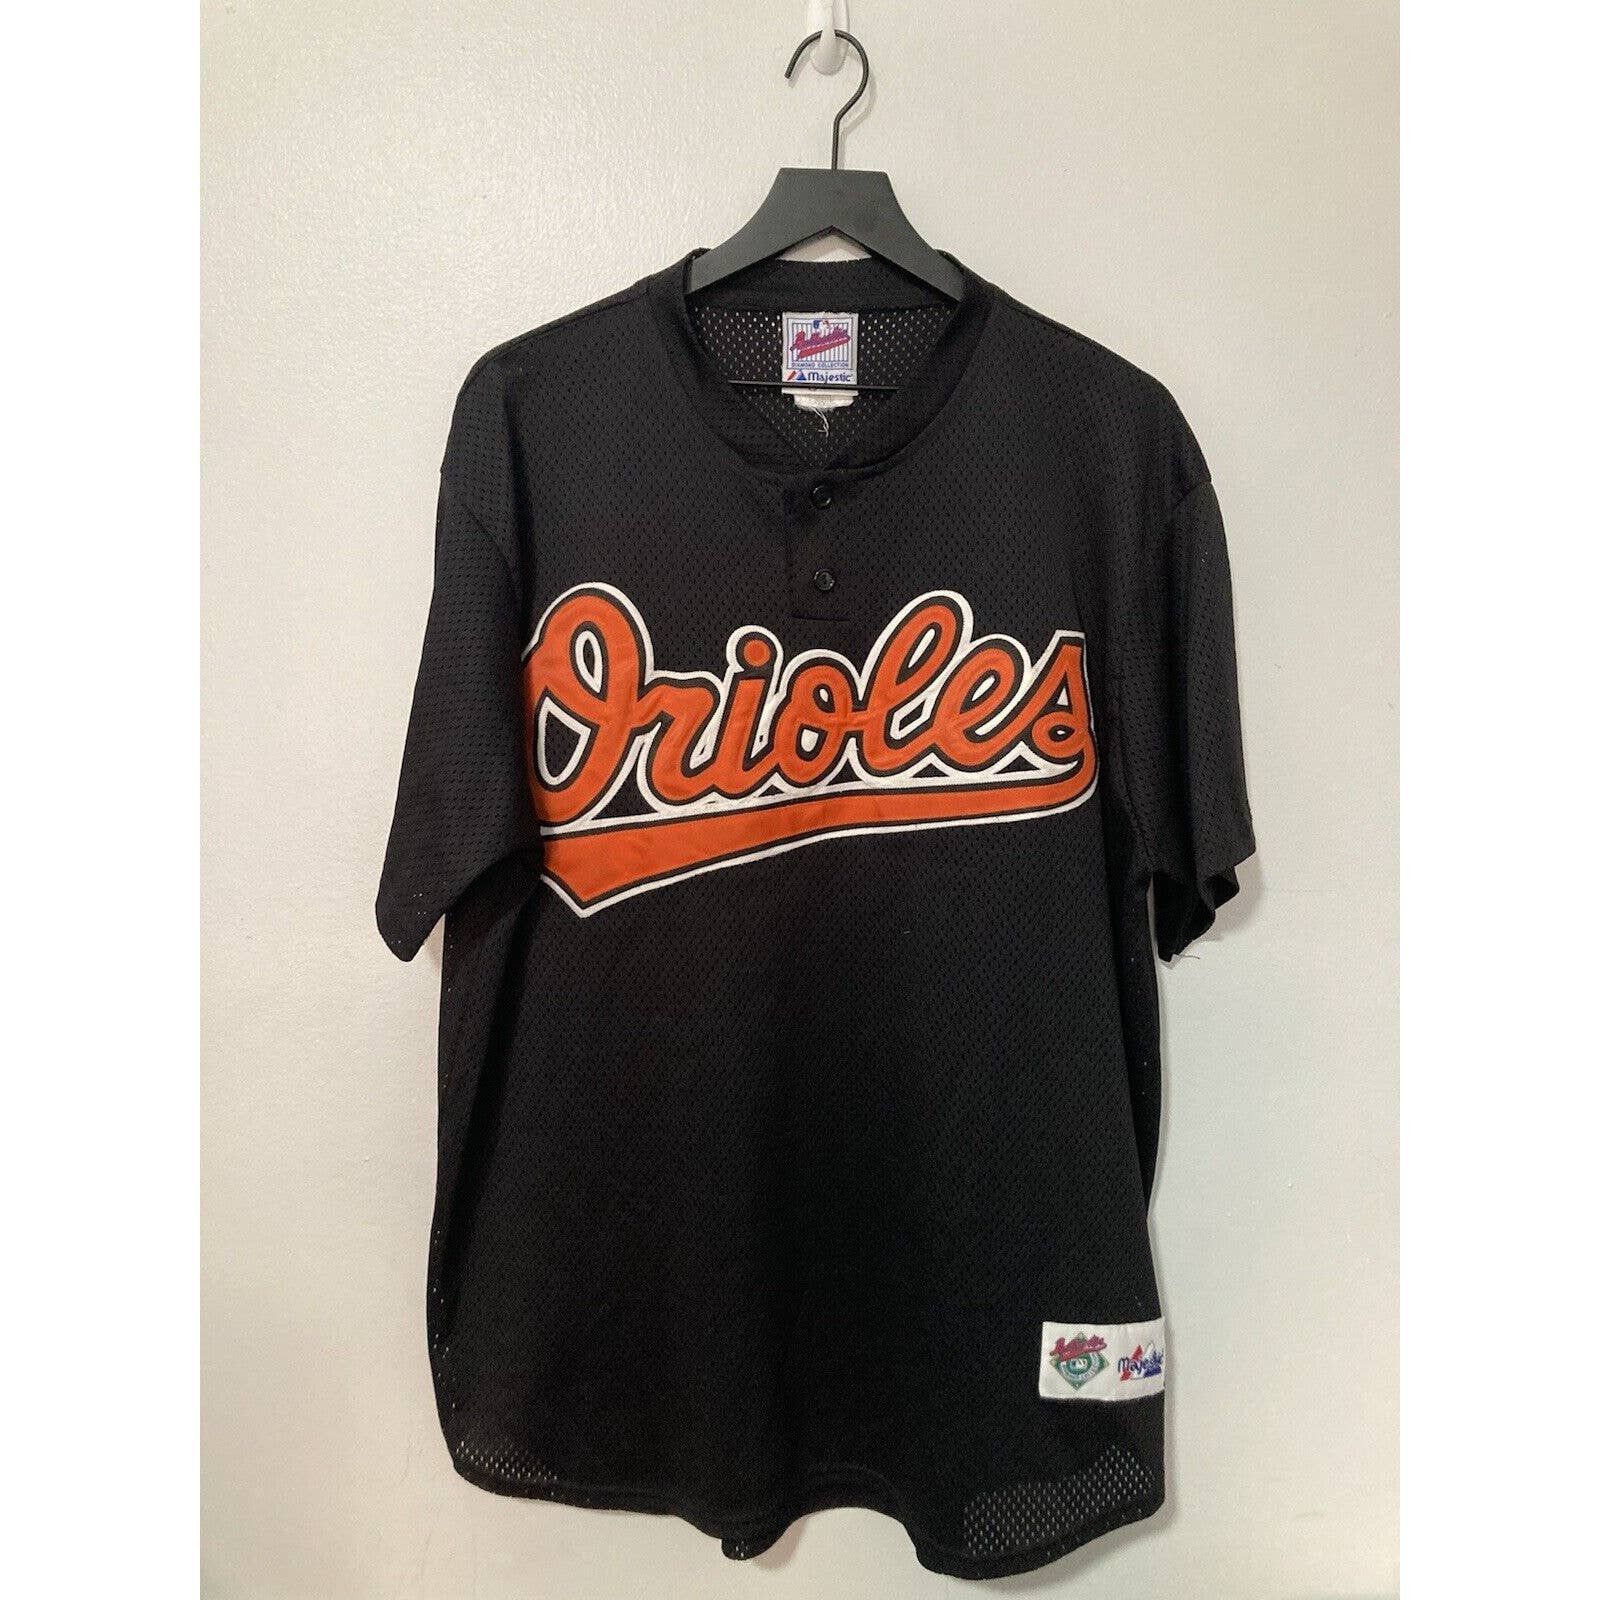 Majestic, Shirts, Vintage Baltimore Orioles Jersey